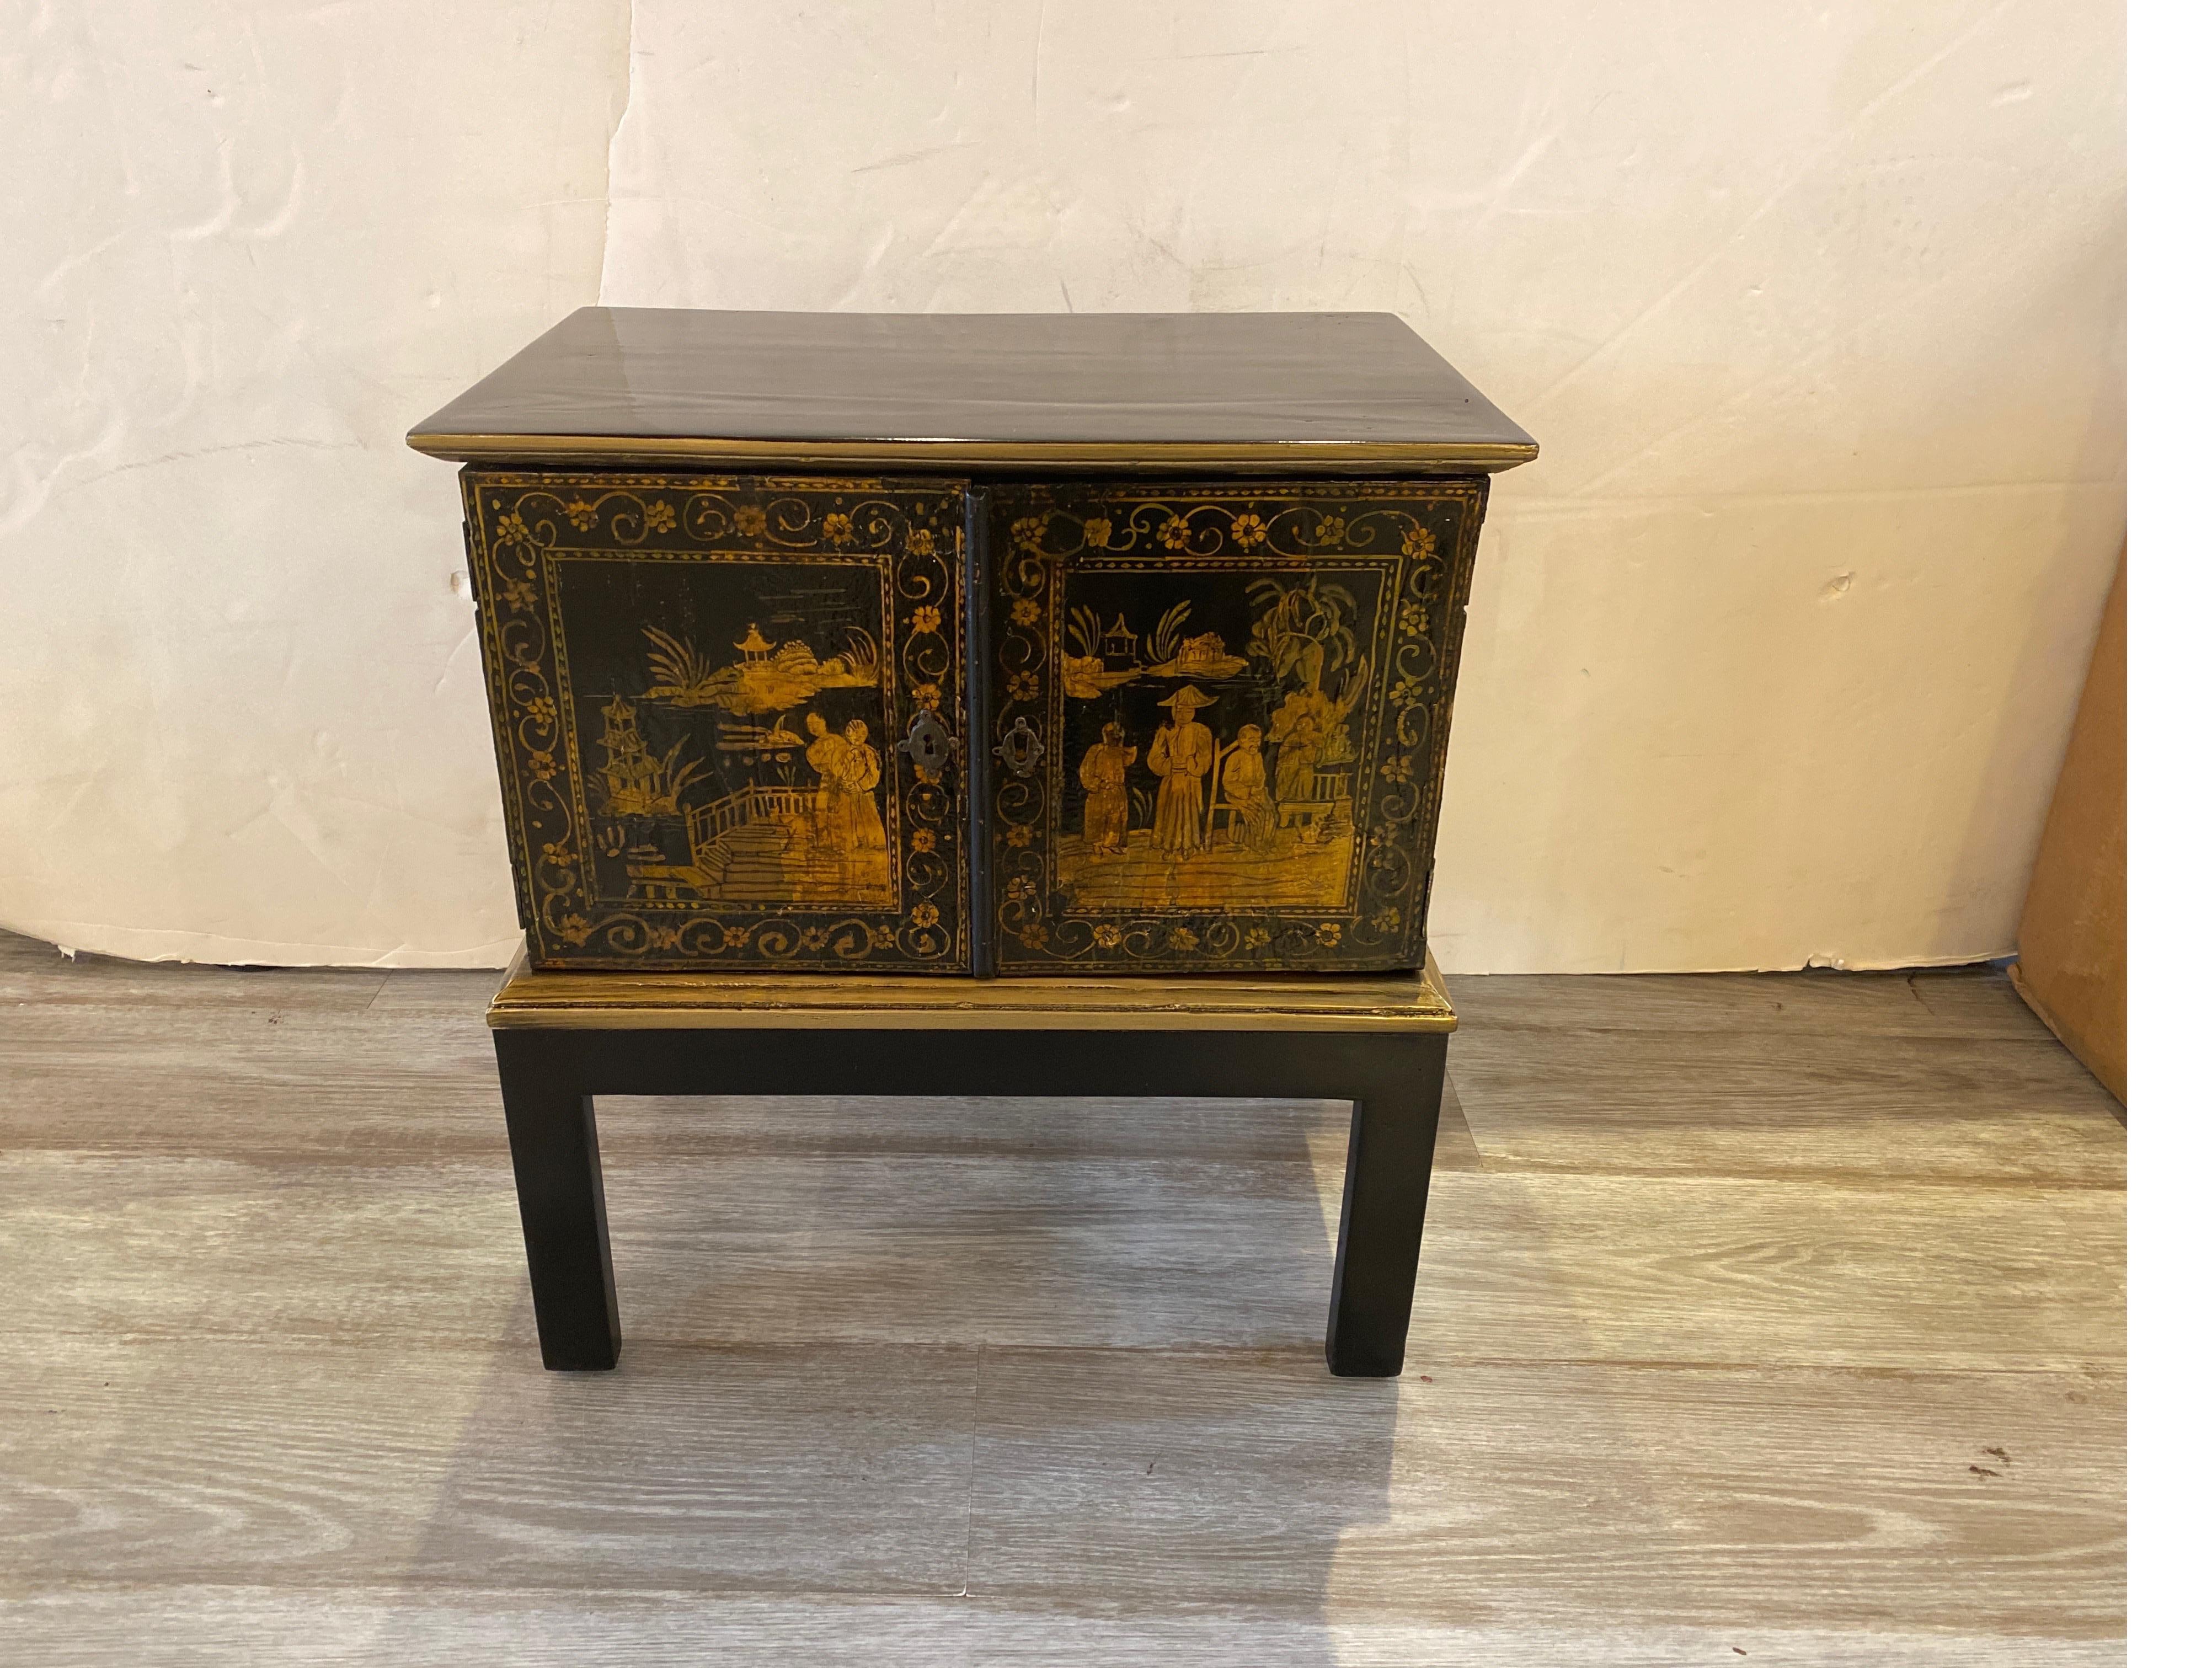 A diminutive black and gold lacquered Anglo-Indian spice cabinet. This is a small version, 18.75 inches tall, 17 inches wide, 11 inches deep. The chinoiserie hand painted doors with a black and gold case with doors that open to reveal small various